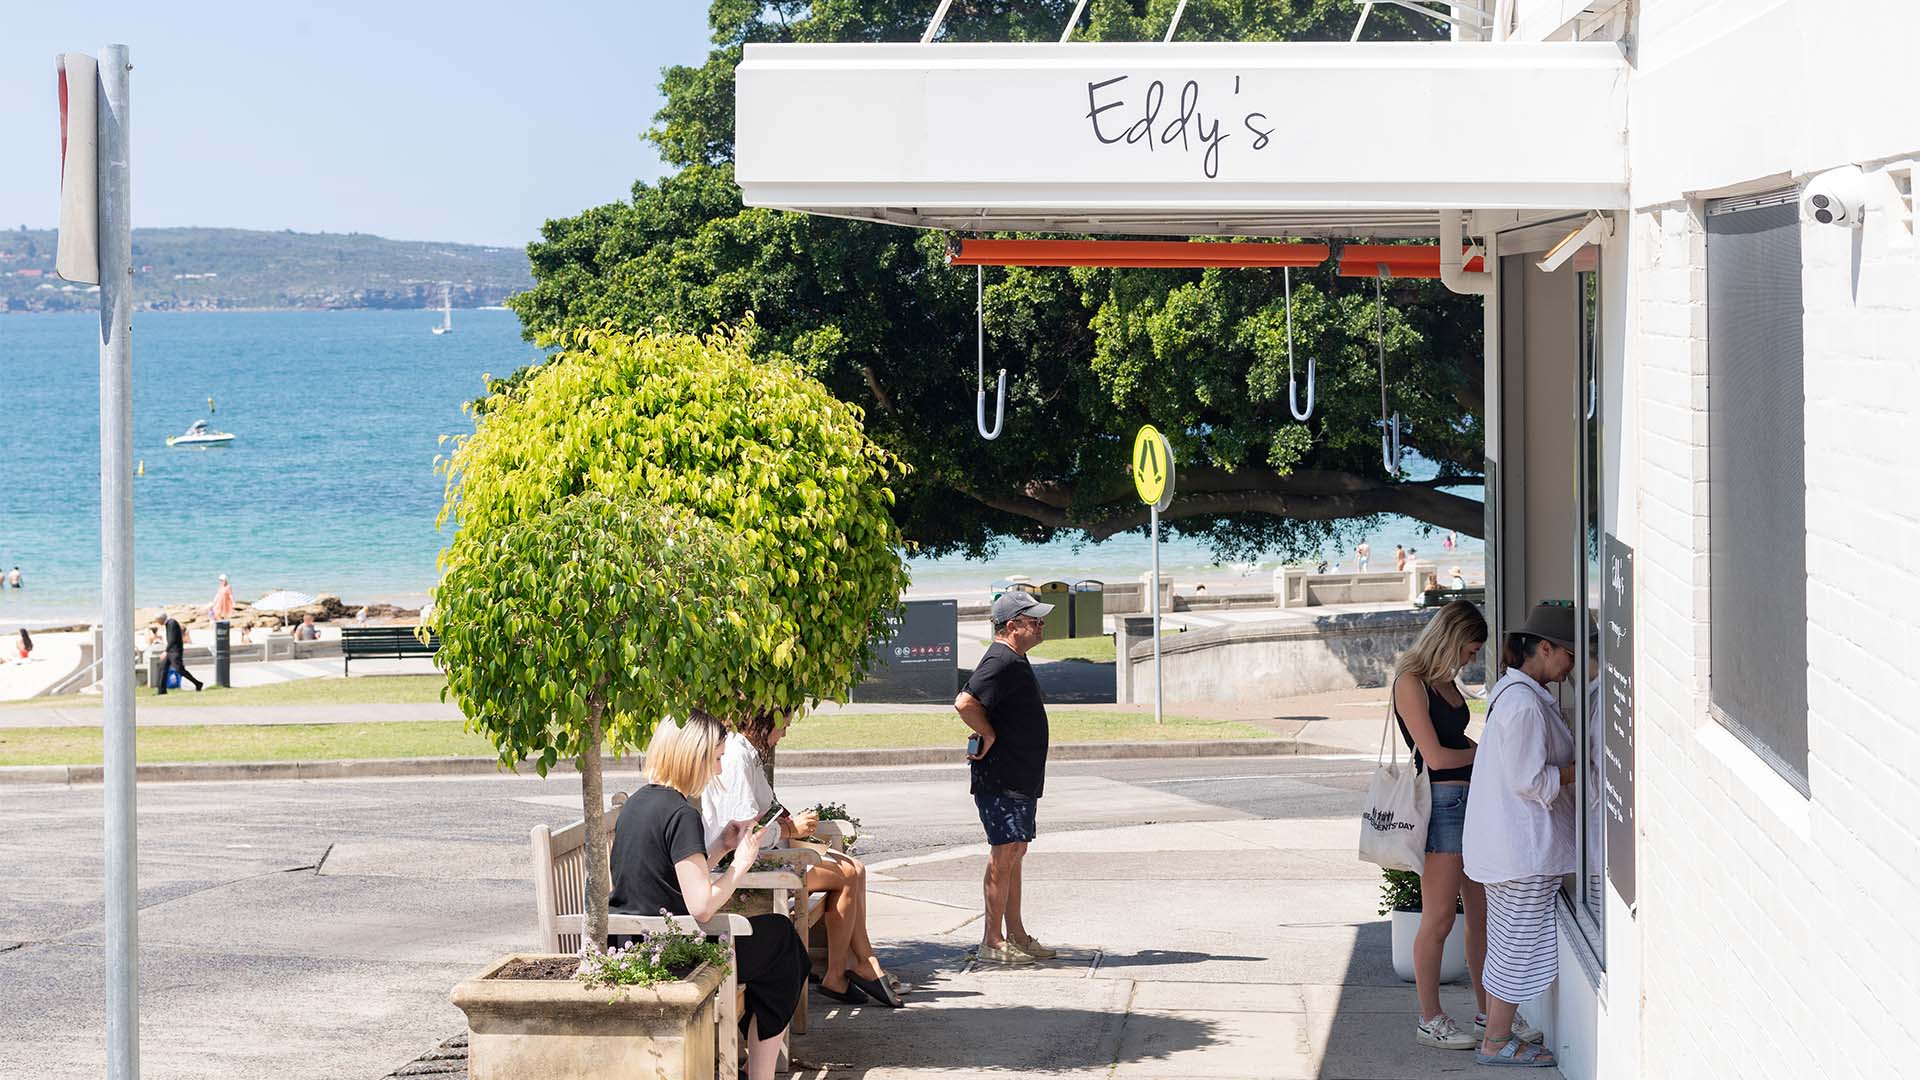 Now Open: Eddy's Is the New Casual Italian Eatery Elevating Your Post-Swim Feeds in Balmoral